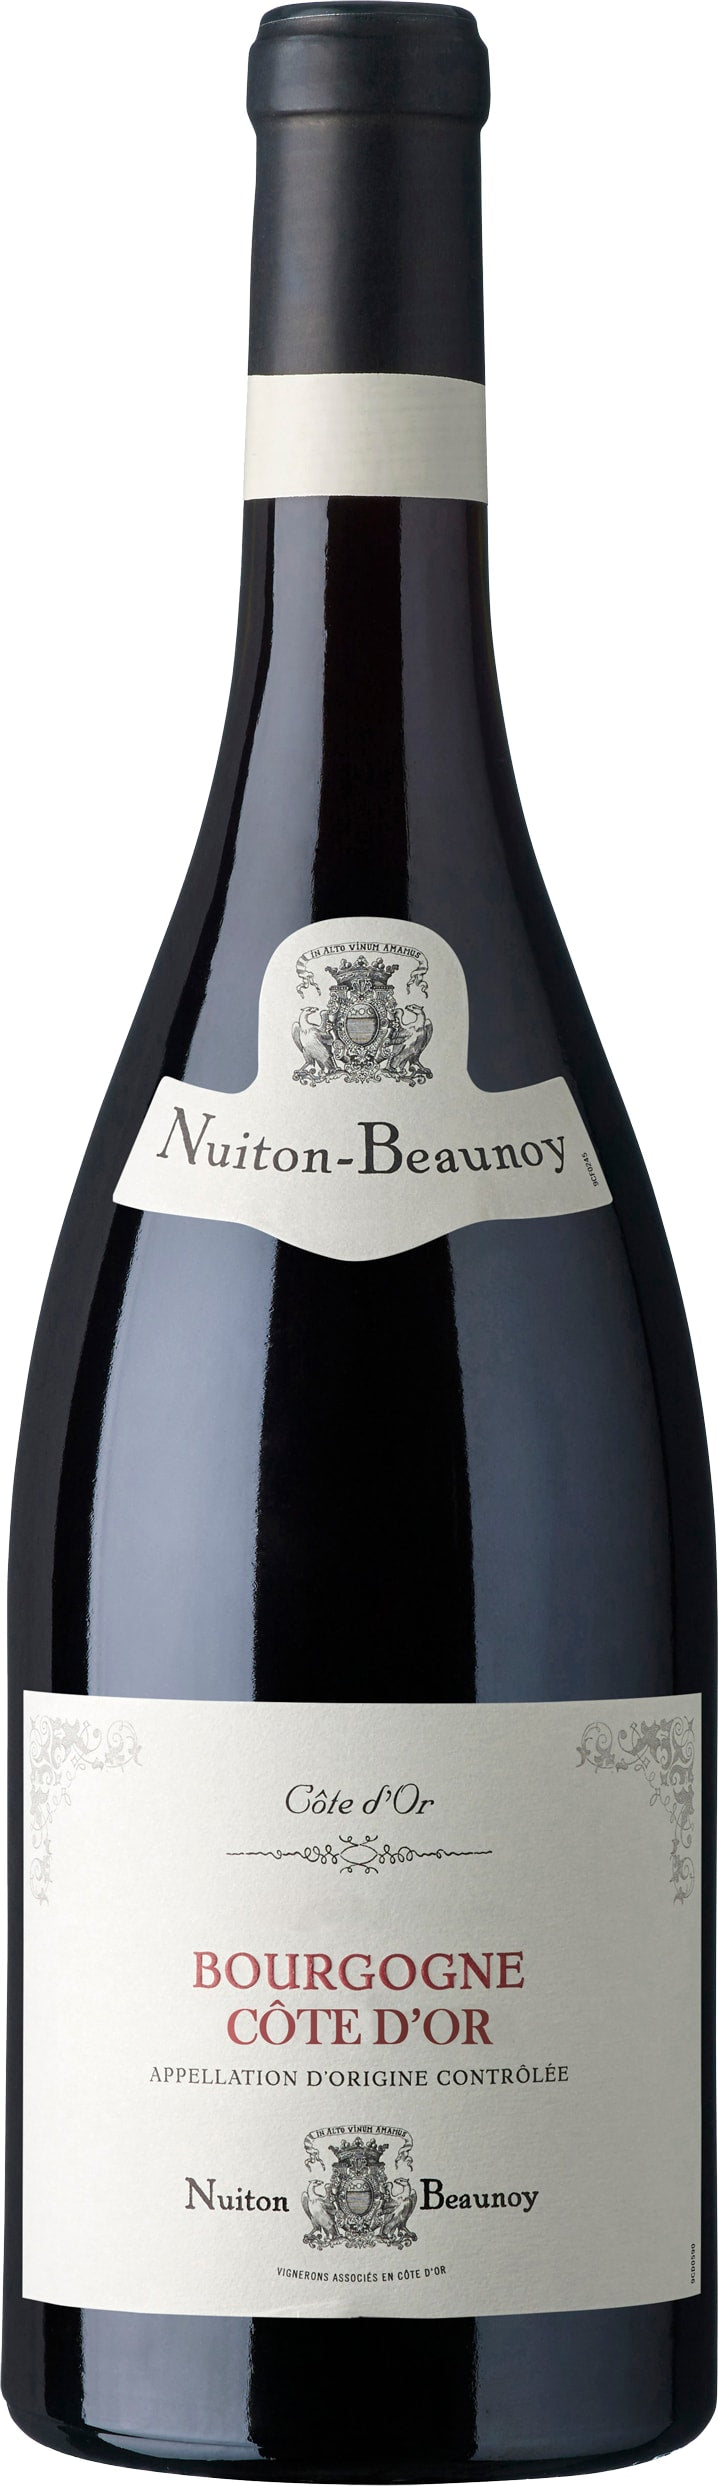 Nuiton-Beaunoy Bourgogne Cote d'Or 2020 75cl - Buy Nuiton-Beaunoy Wines from GREAT WINES DIRECT wine shop